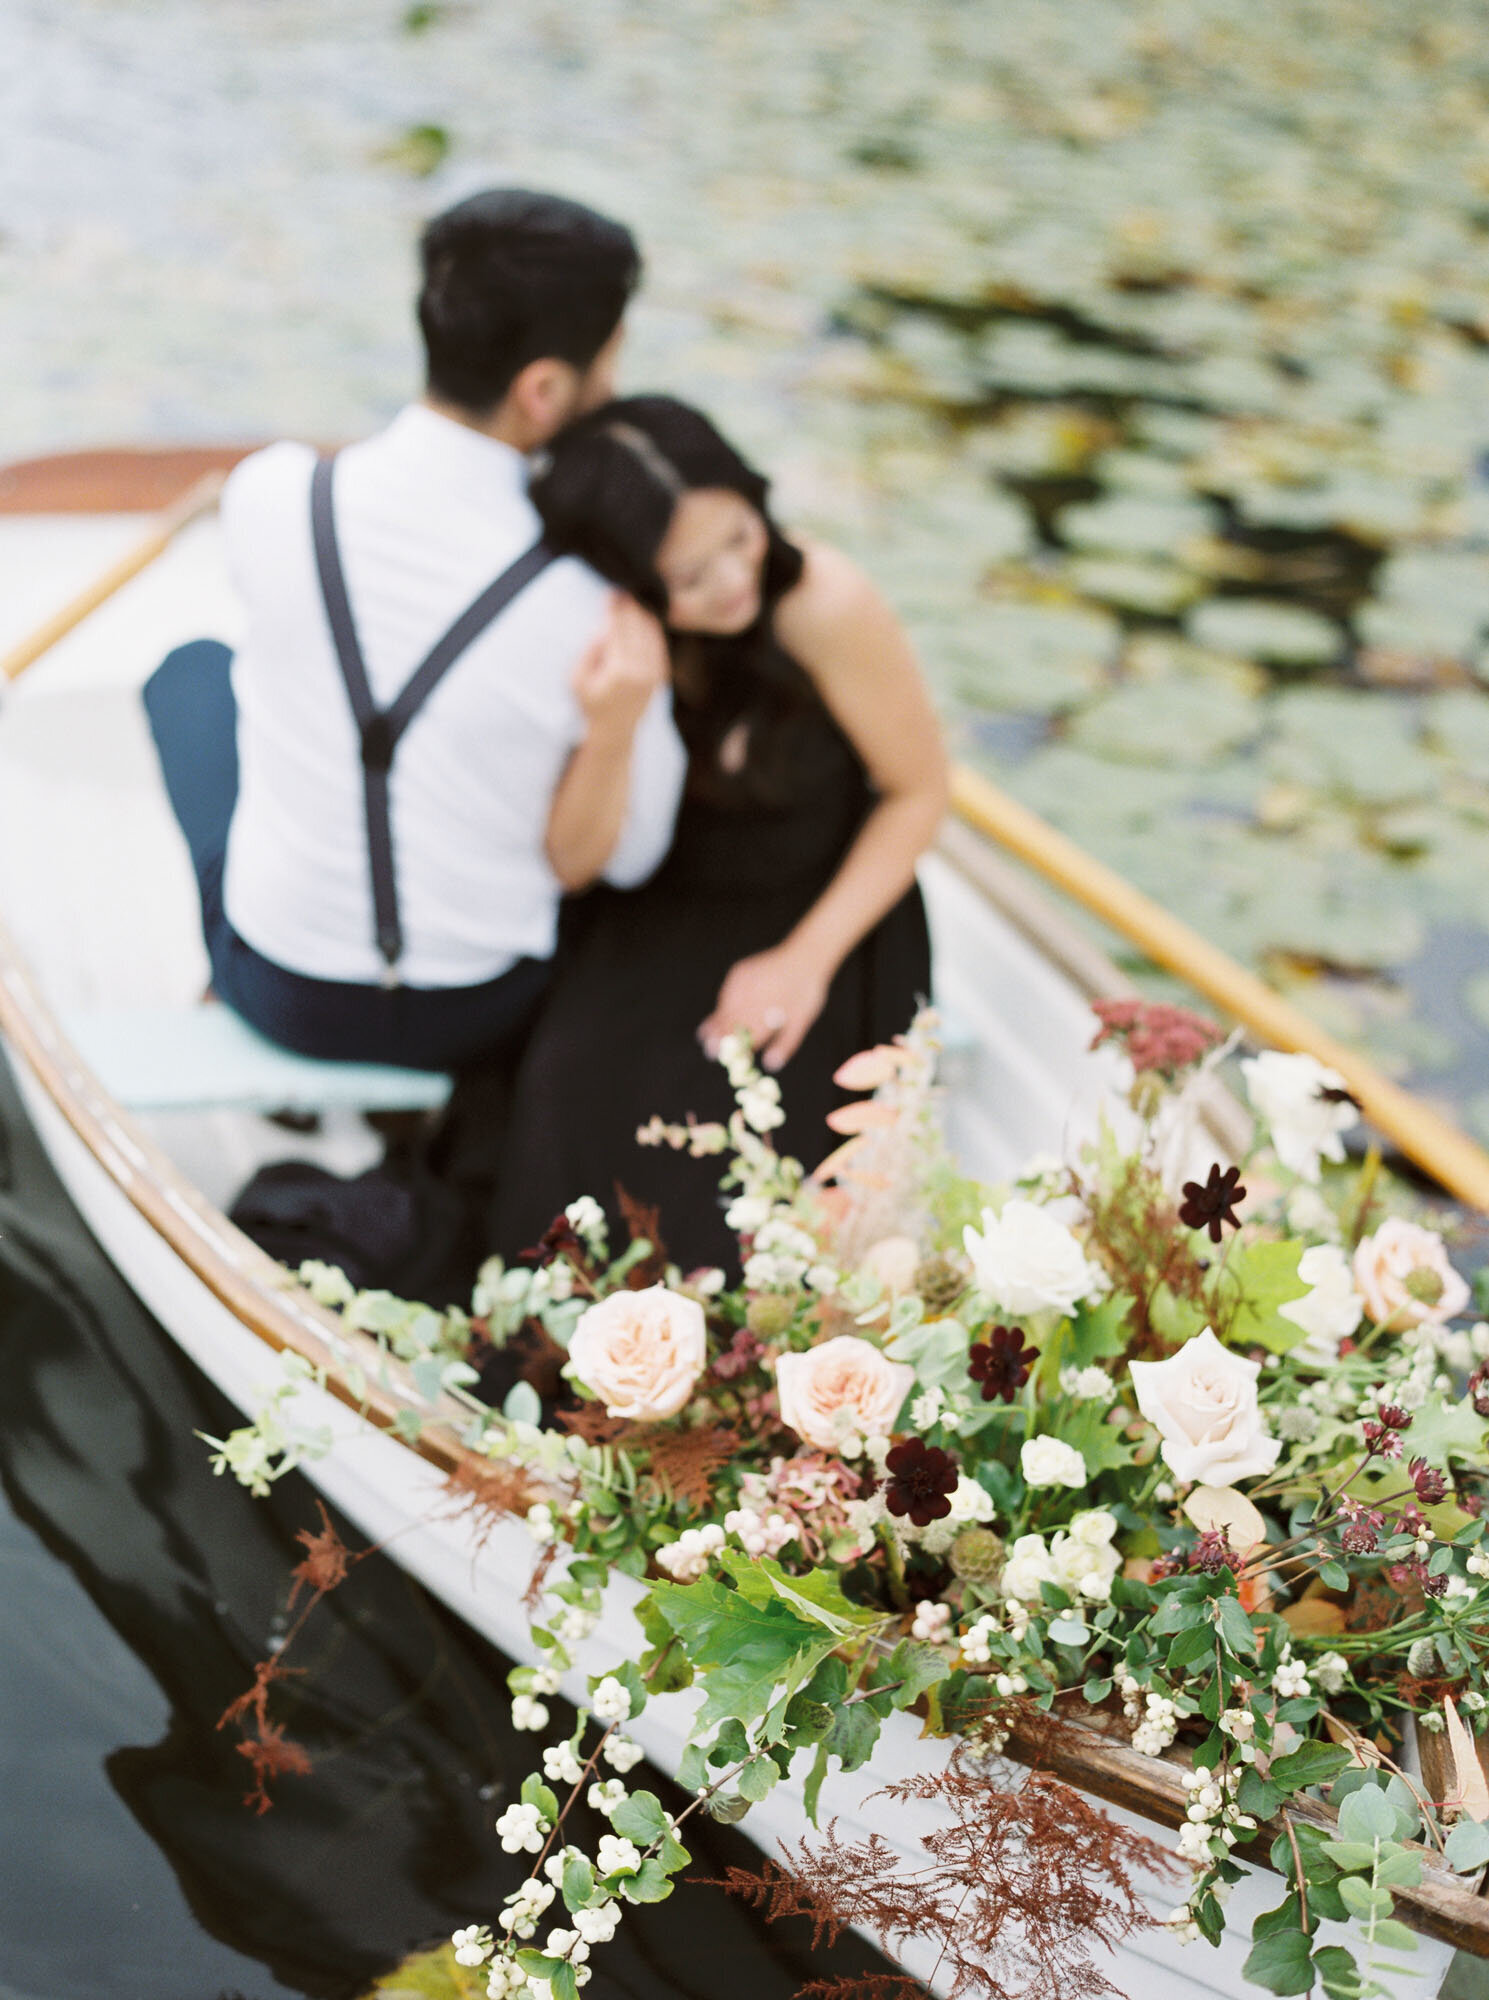 Bride and groom in a boat on a lake